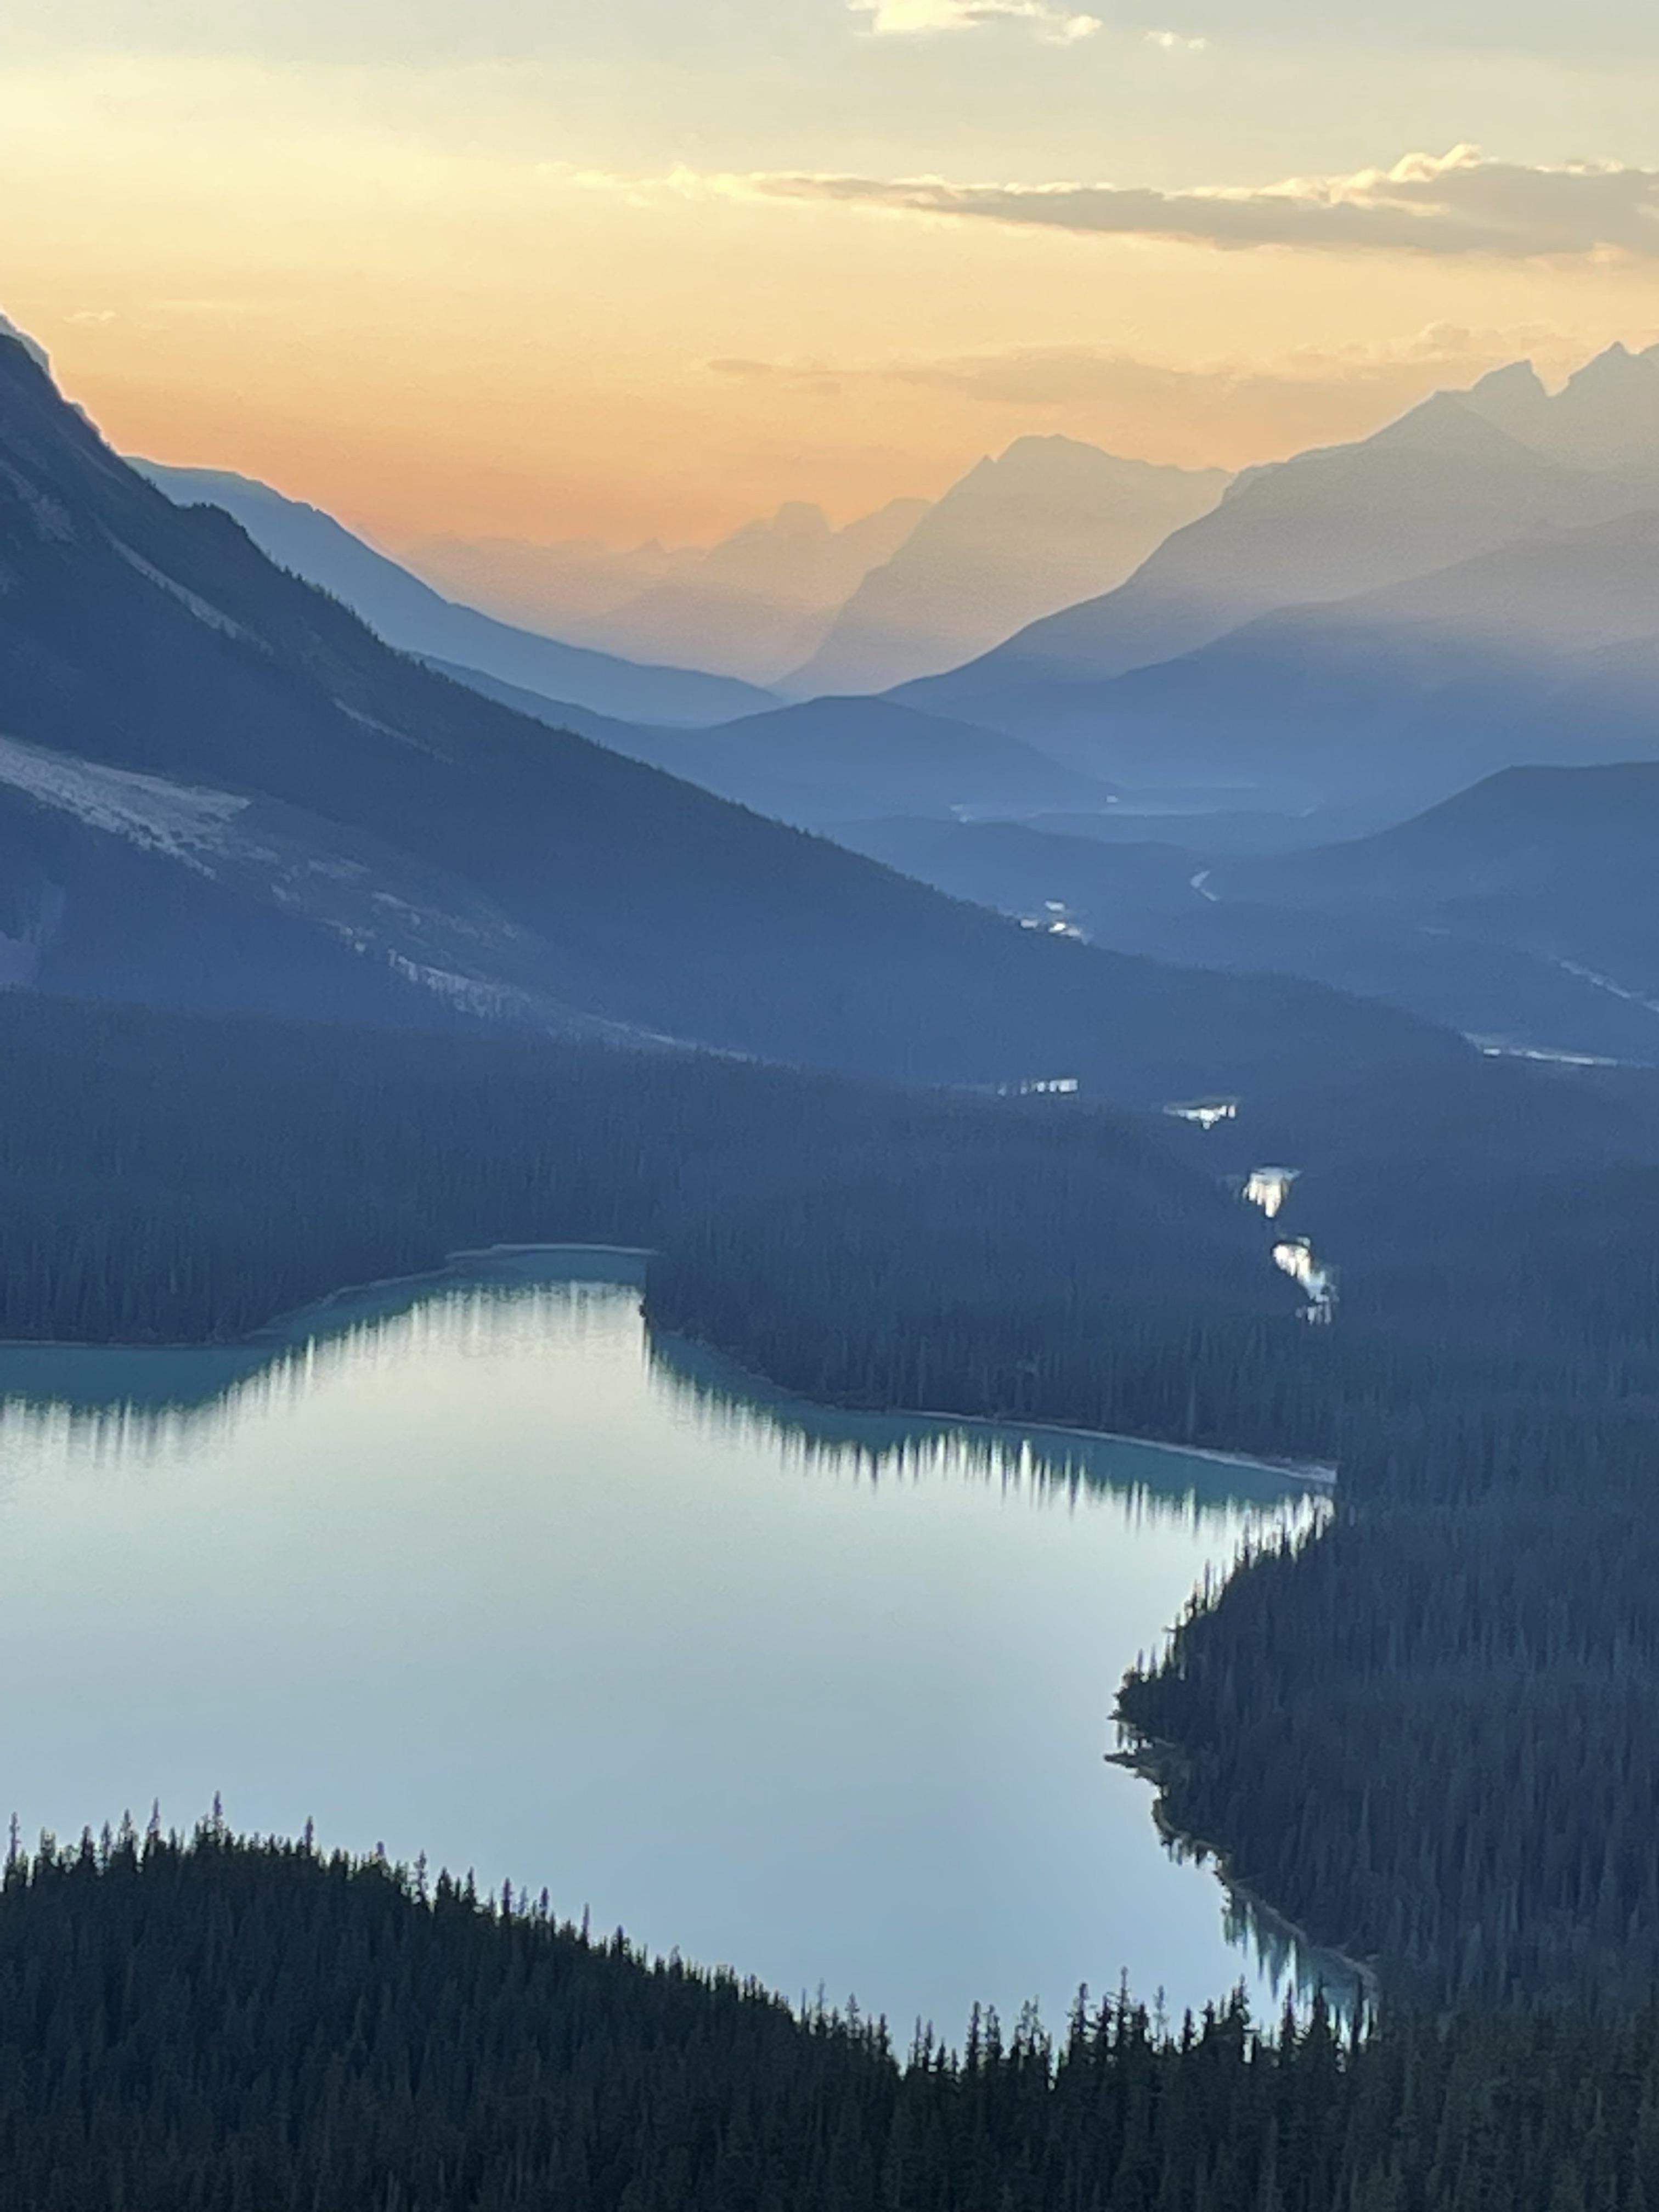 Don't tell anyone, but Peyto Lake at sunset is the most beautiful view in the whole area